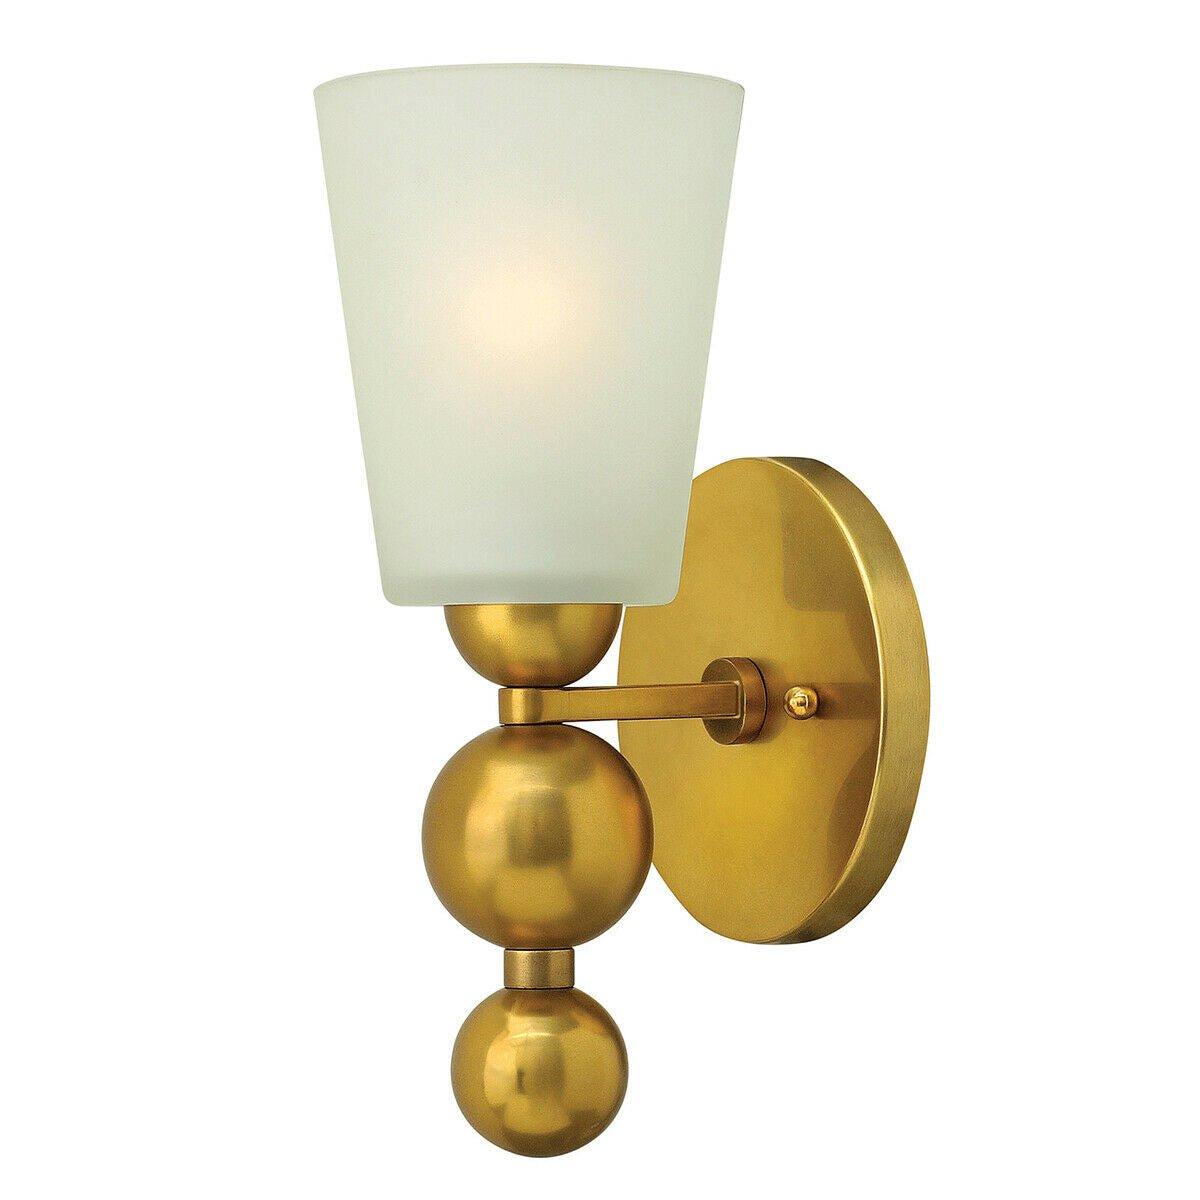 Wall Light Tapered Etched Glass Shade Brass Spheres Vintage Brass LED E27 60W